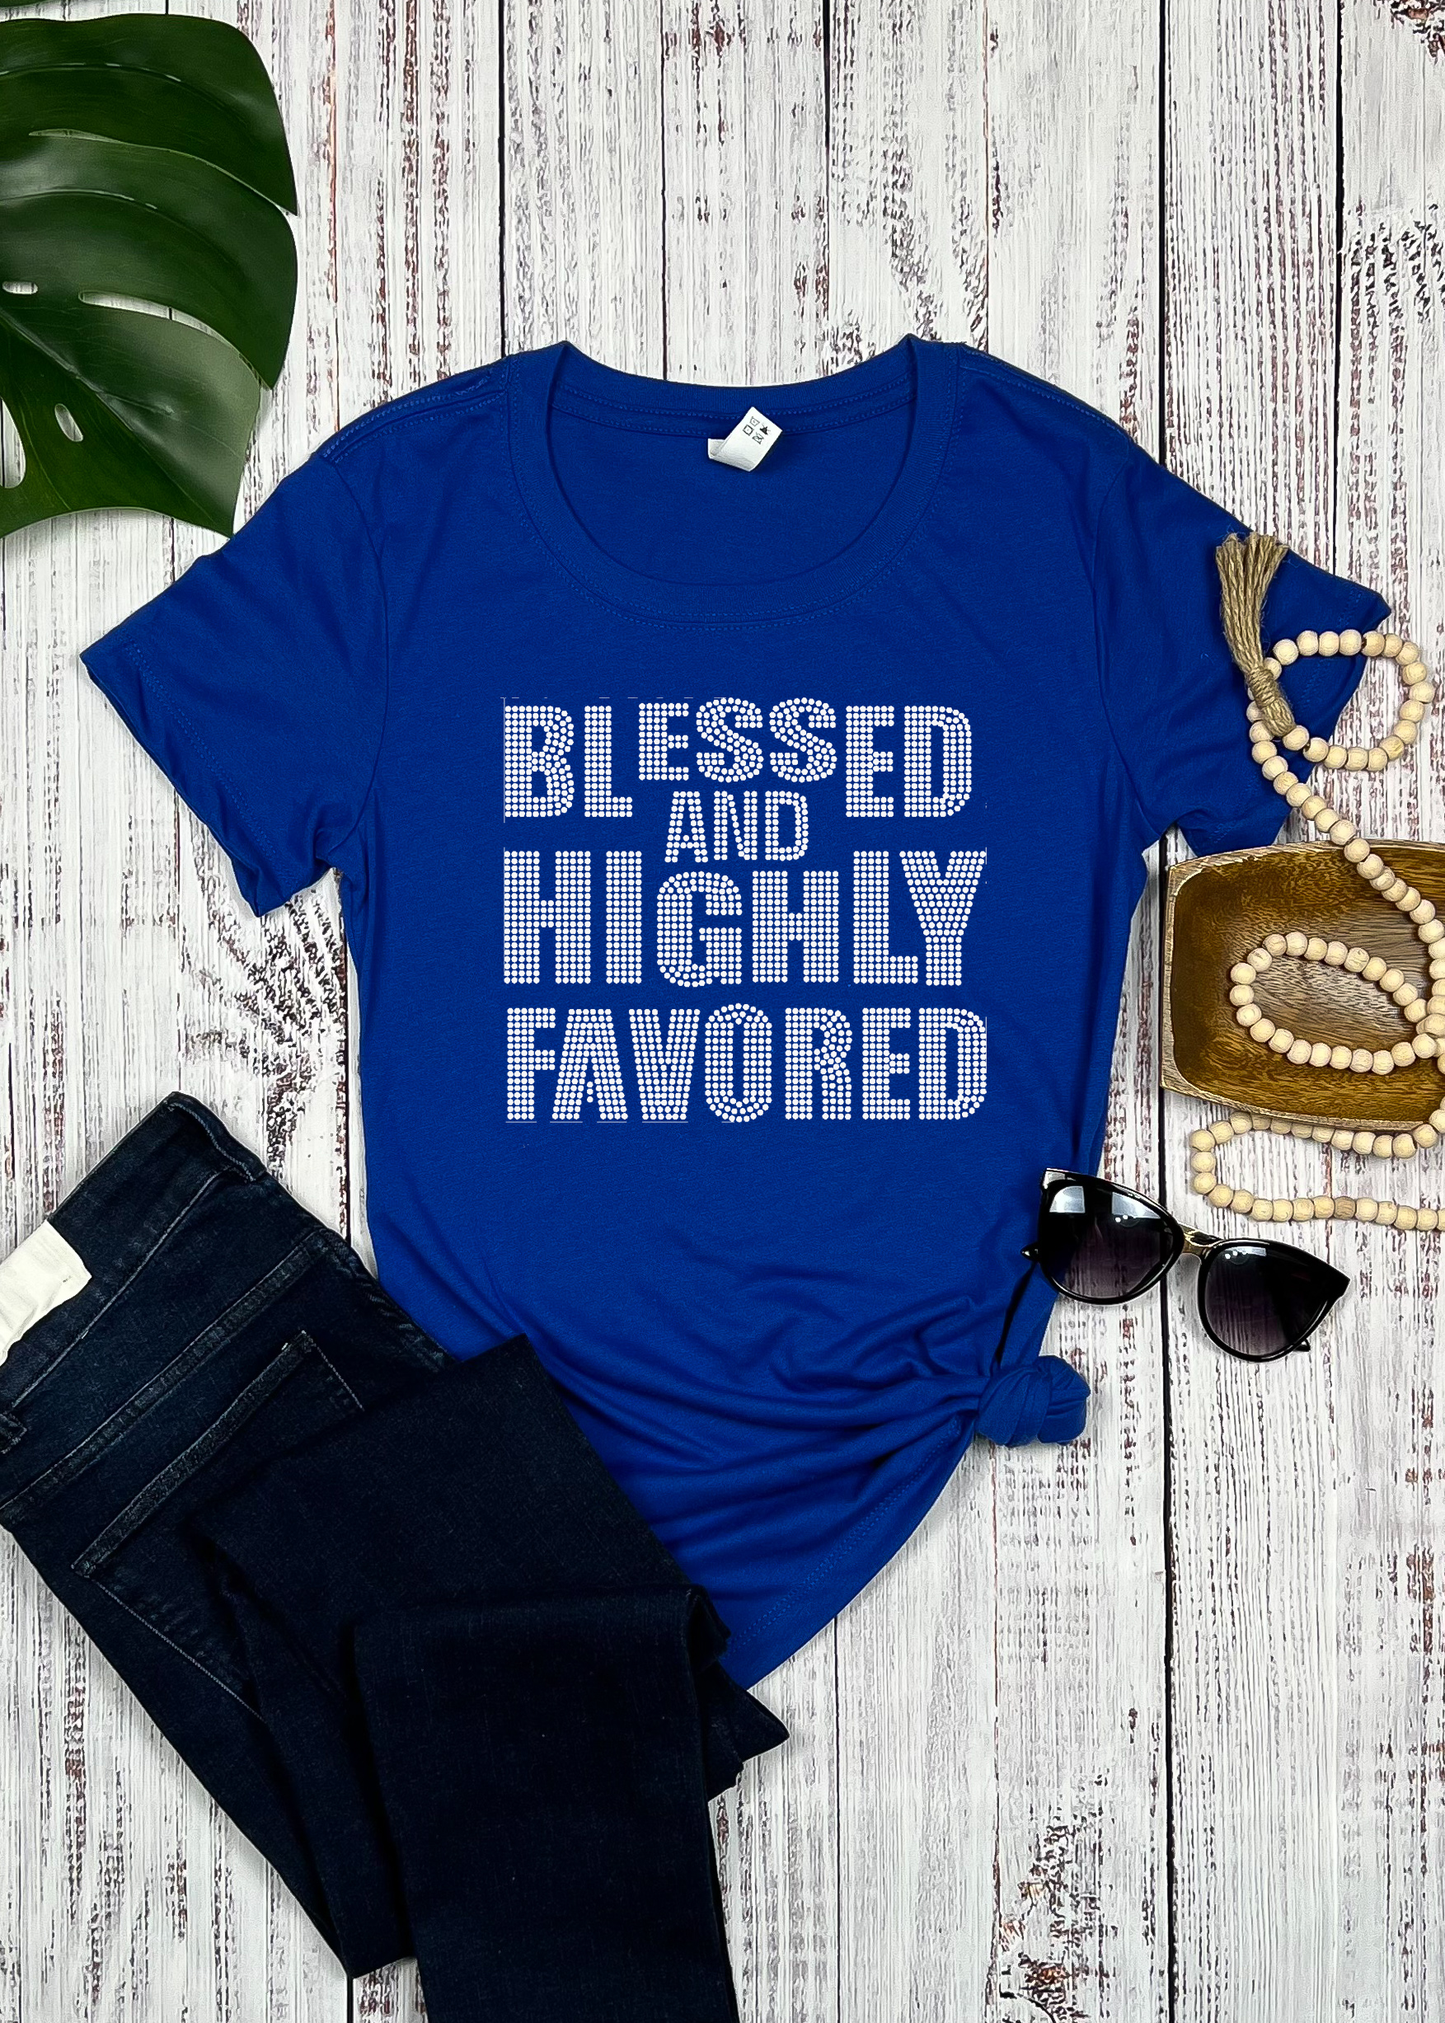 Blessed and Highly Favored Rhinestone T-Shirt (Pos Only)